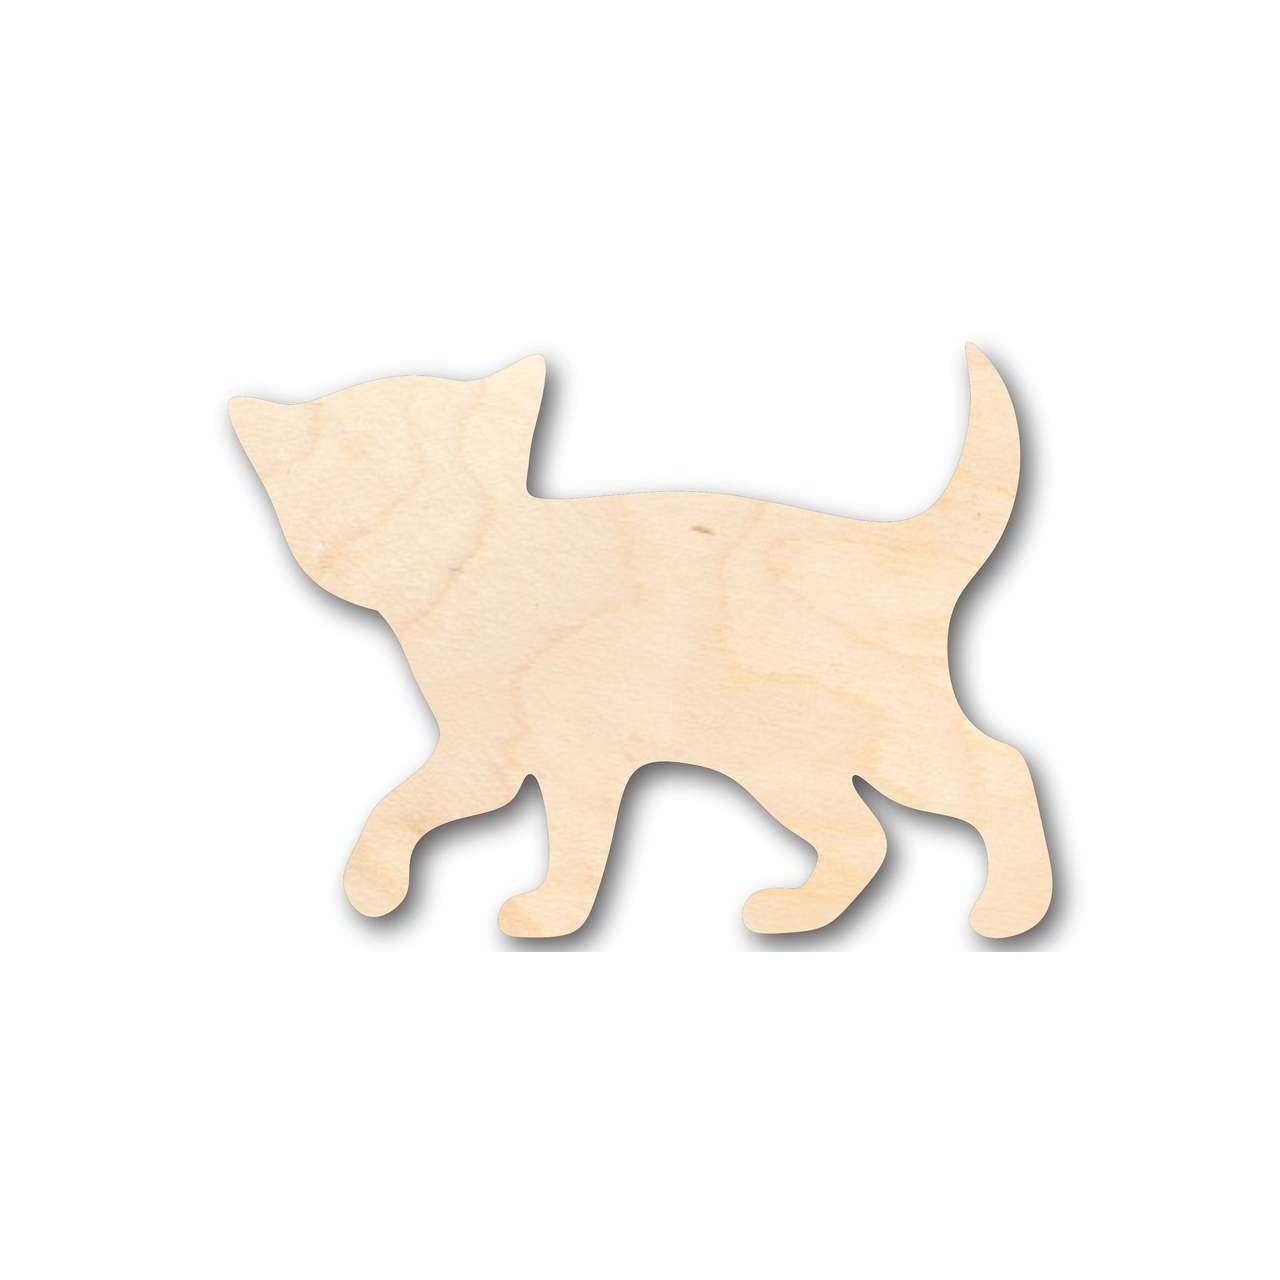 Unfinished Wooden Kitten Cat Shape - Animal - Pet - Craft - up to 24